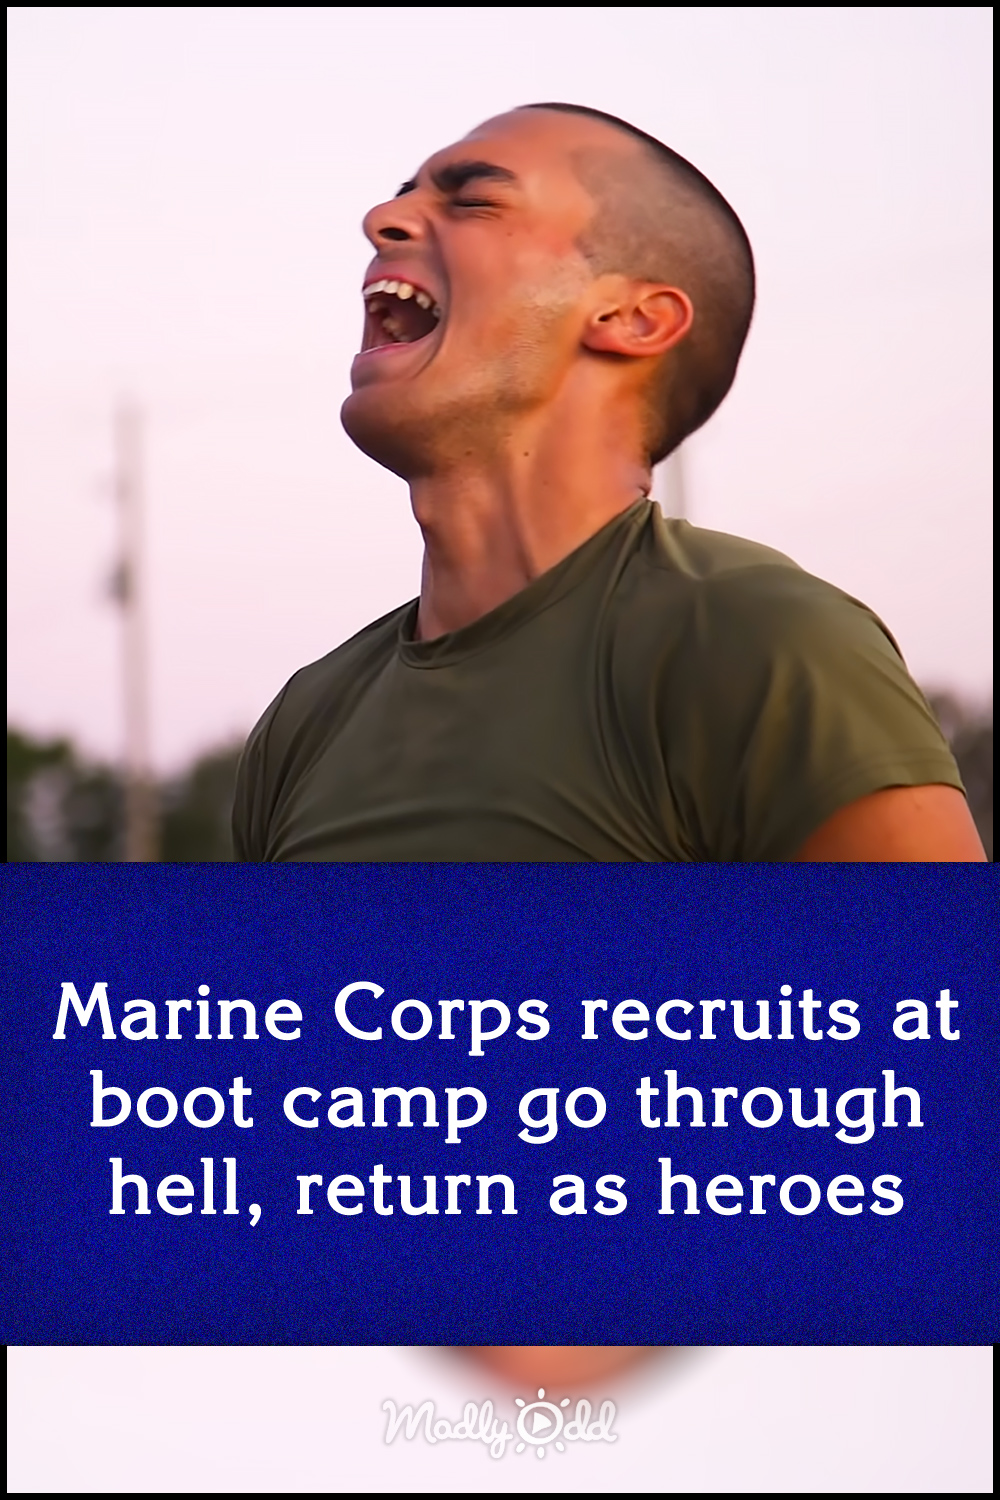 Marine Corps recruits at boot camp go through hell, return as heroes